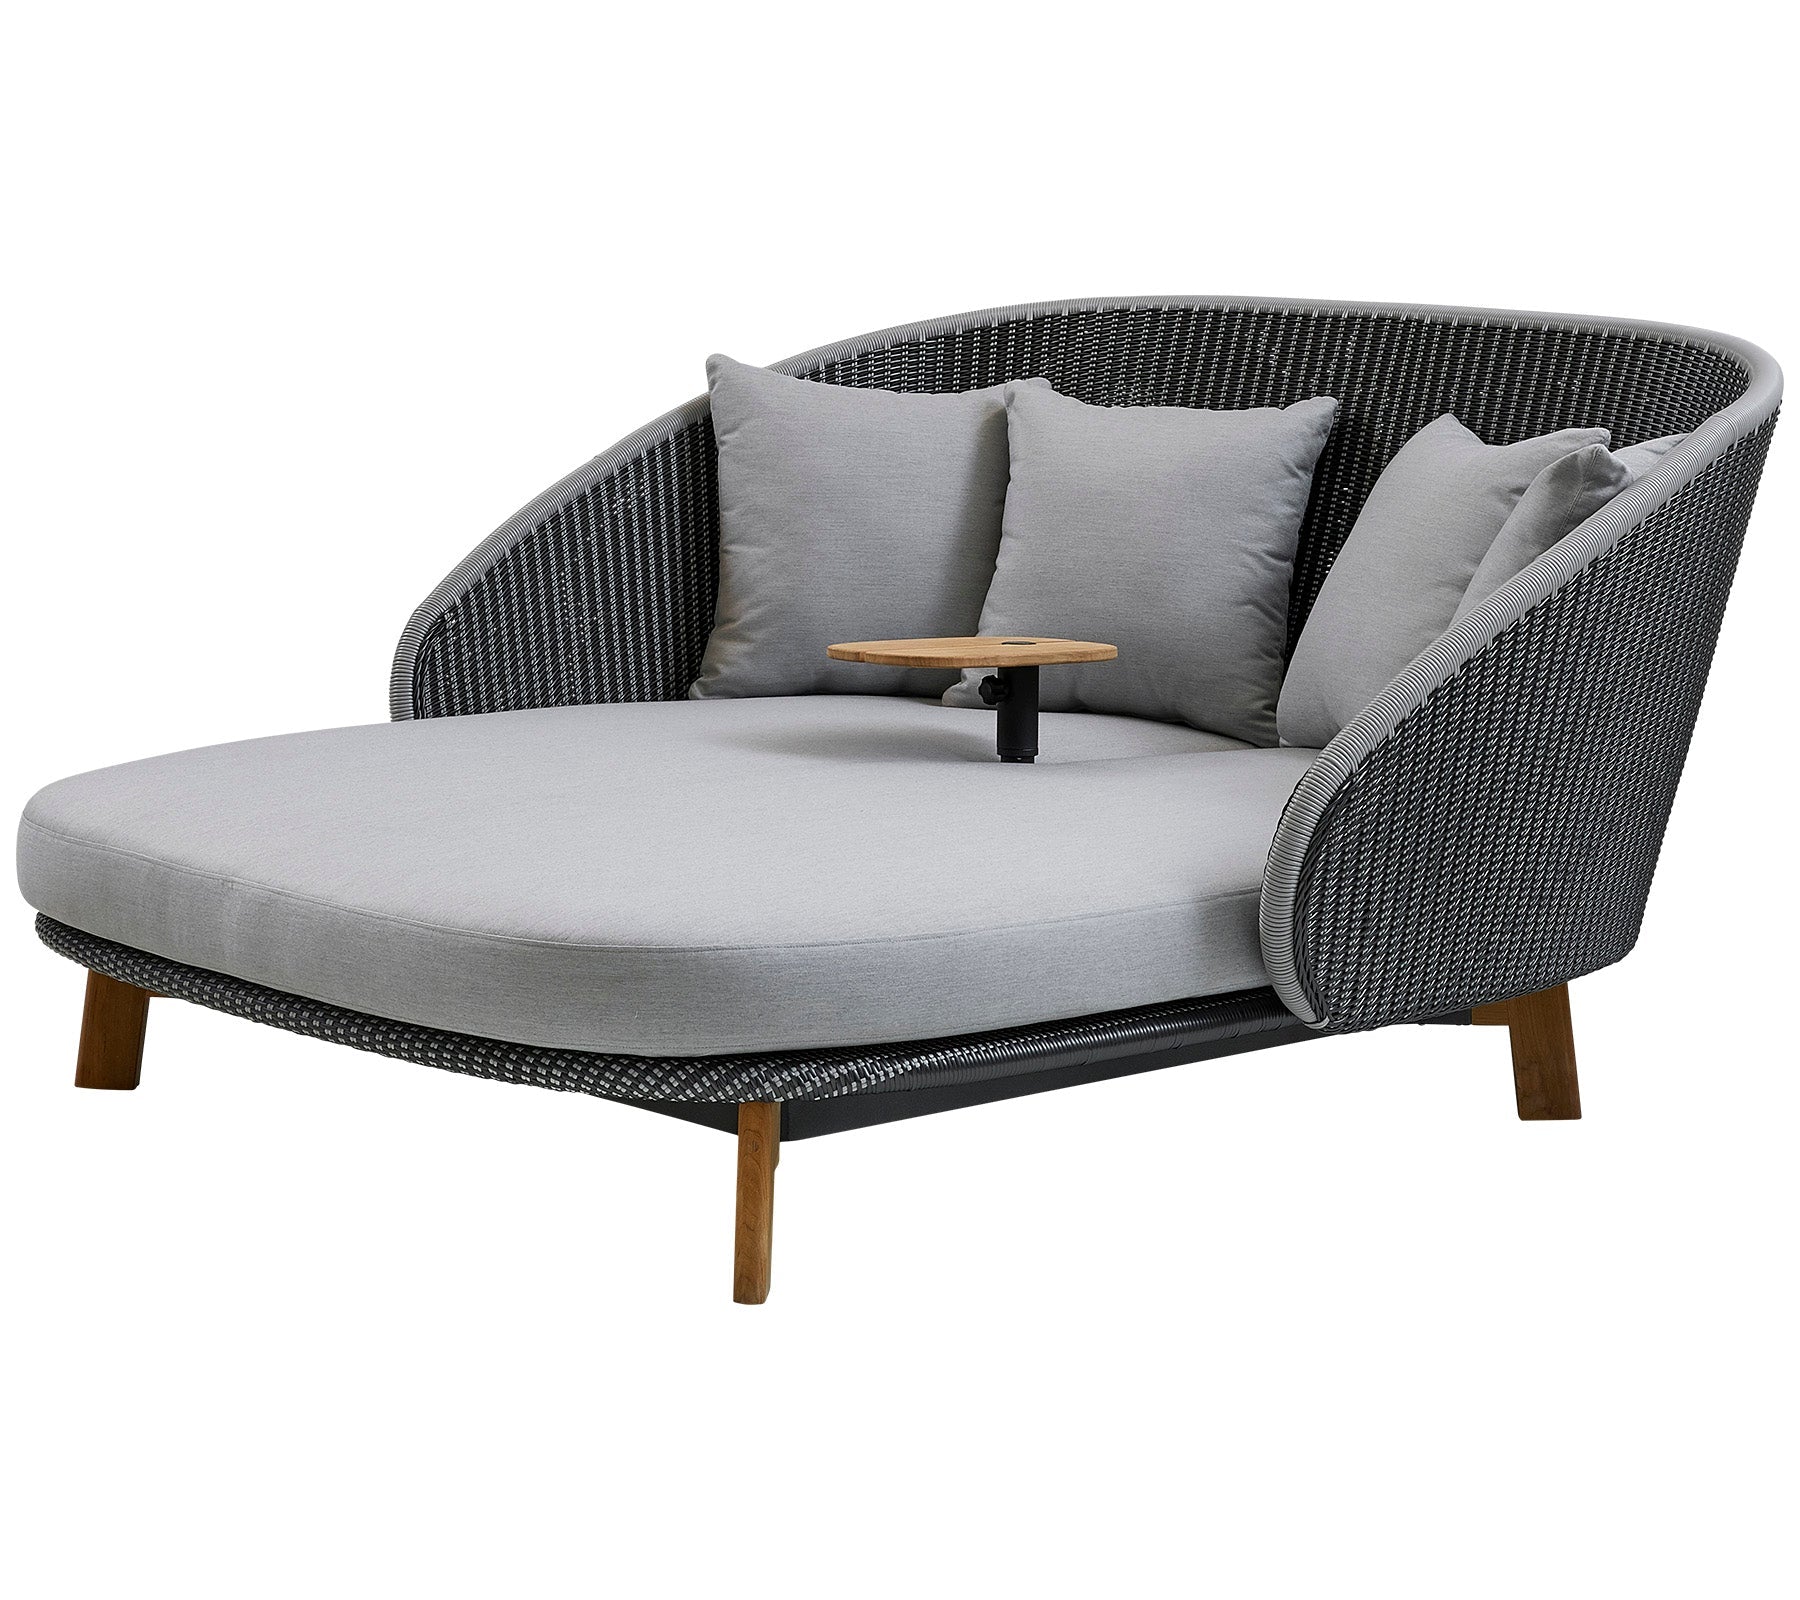 Cane-line Peacock Daybed 5561GIT